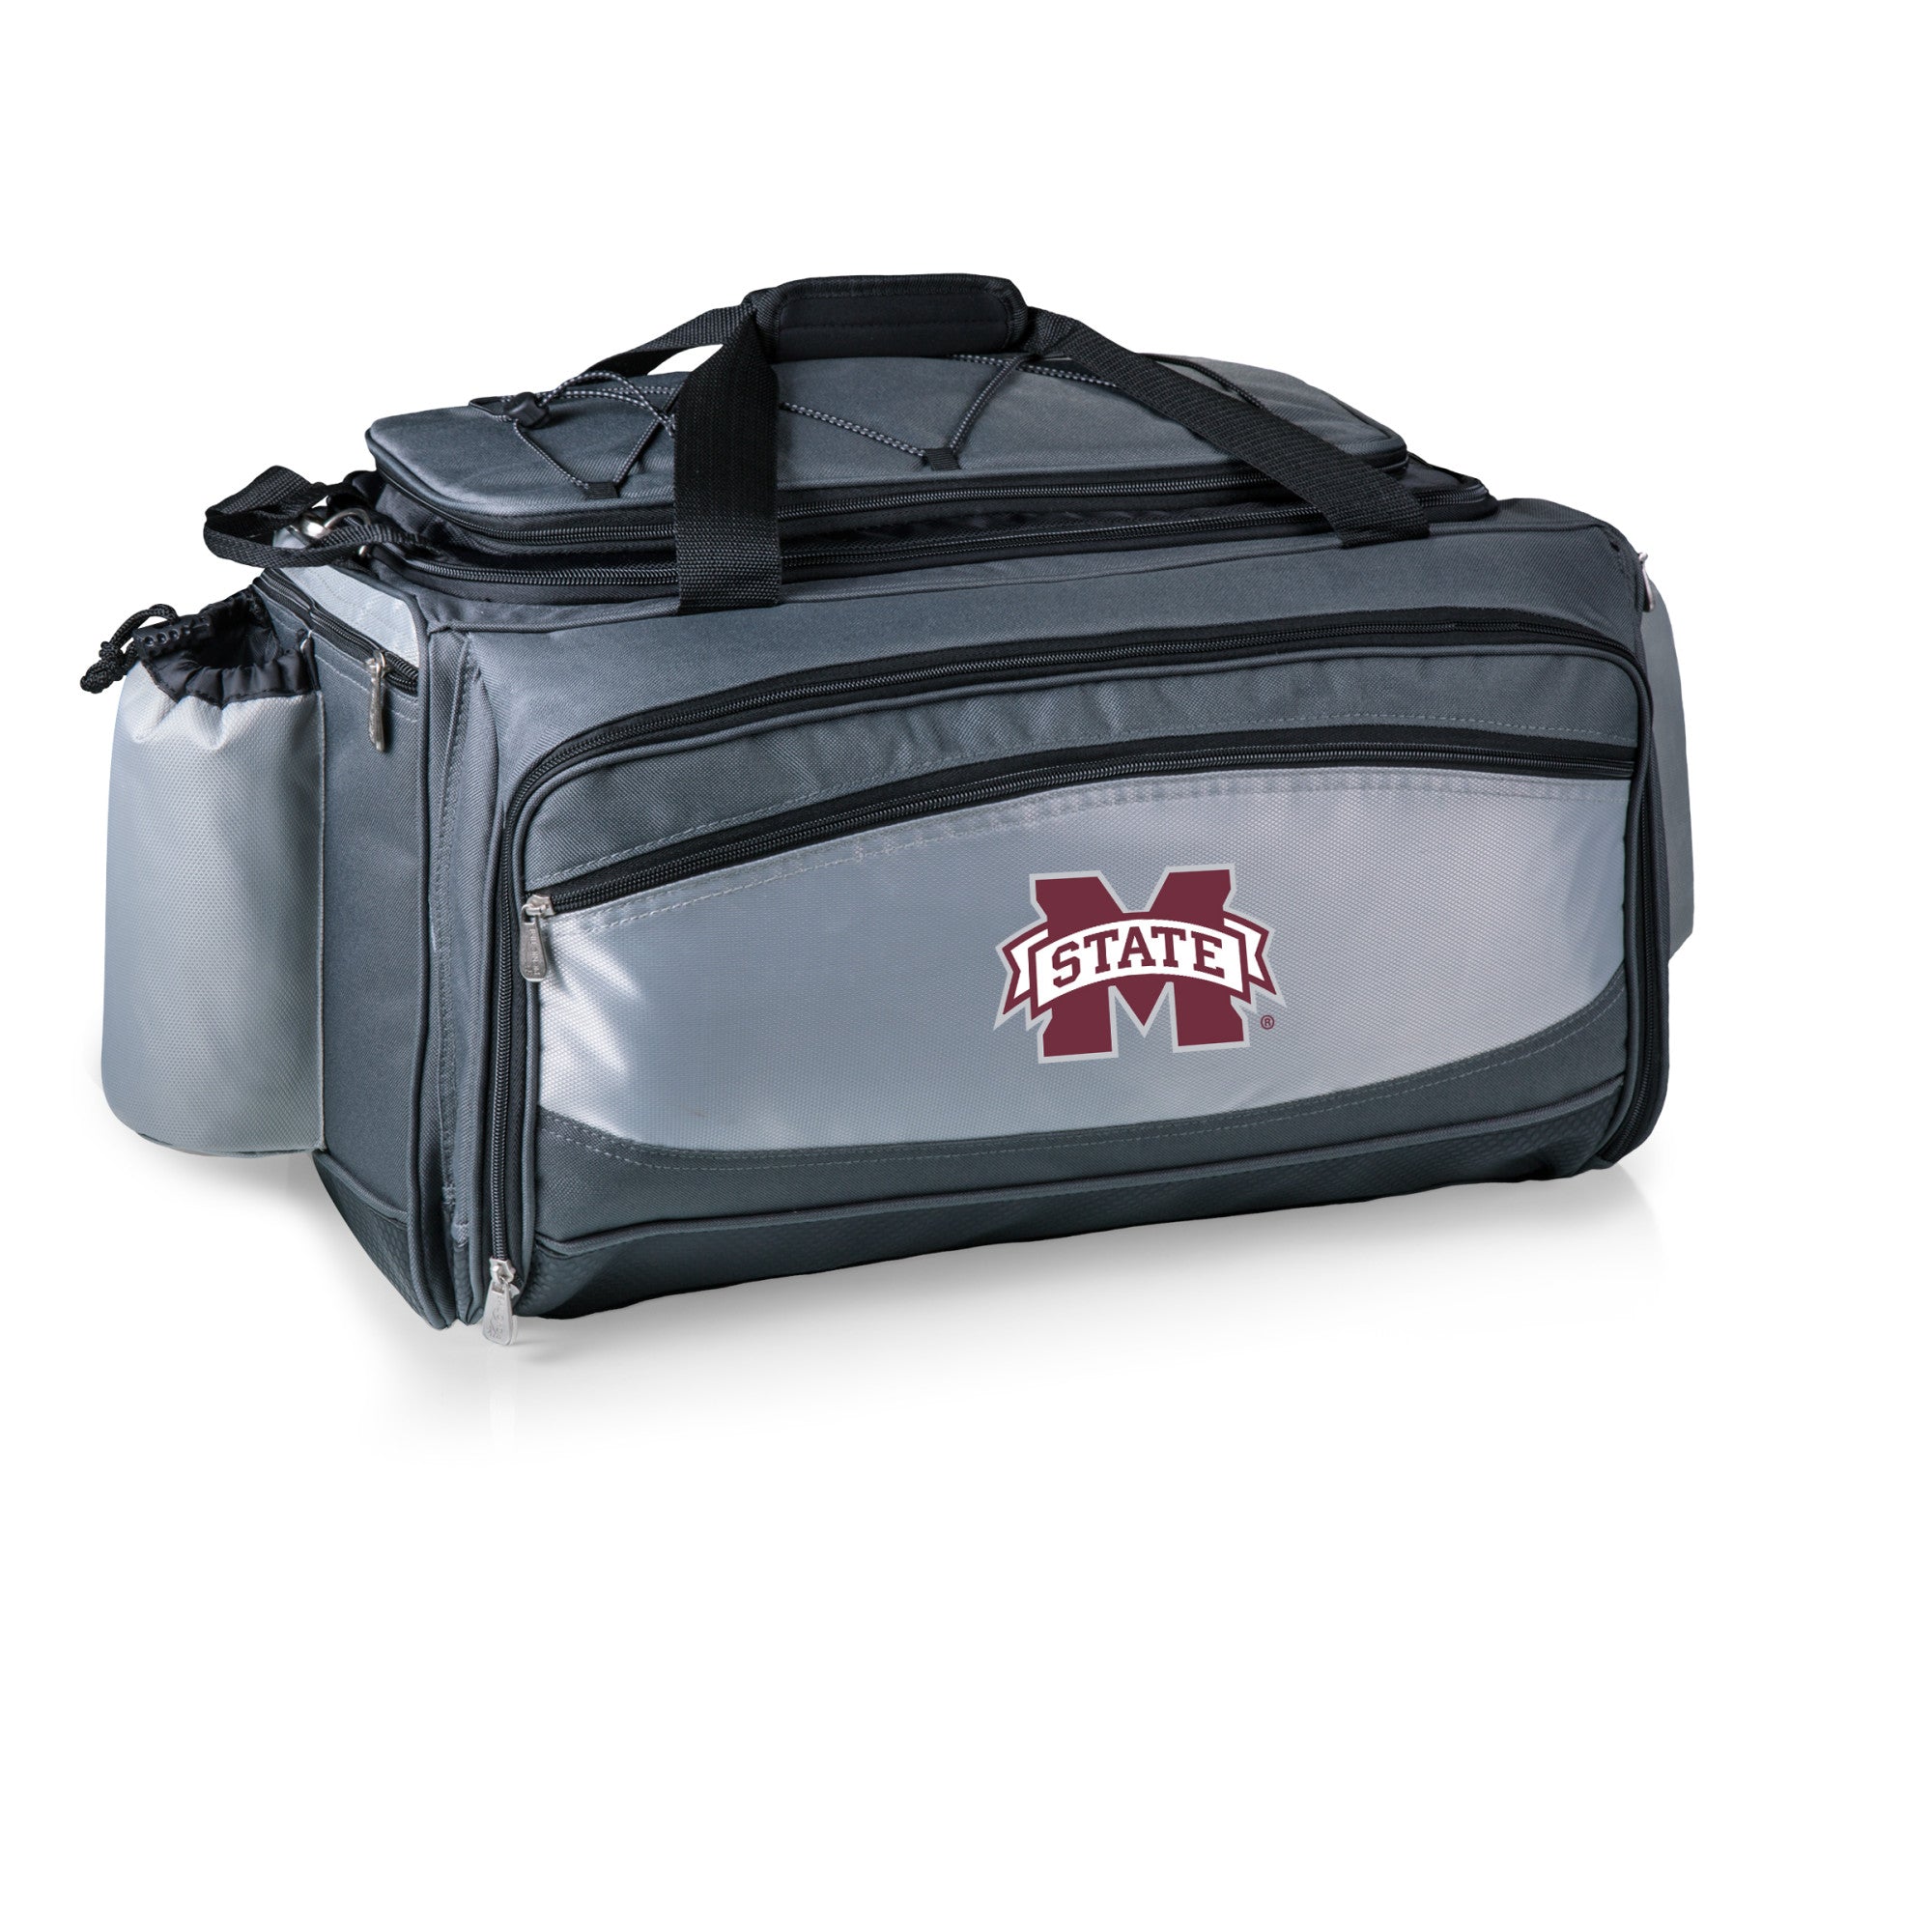 Mississippi State Bulldogs - Vulcan Portable Propane Grill & Cooler Tote